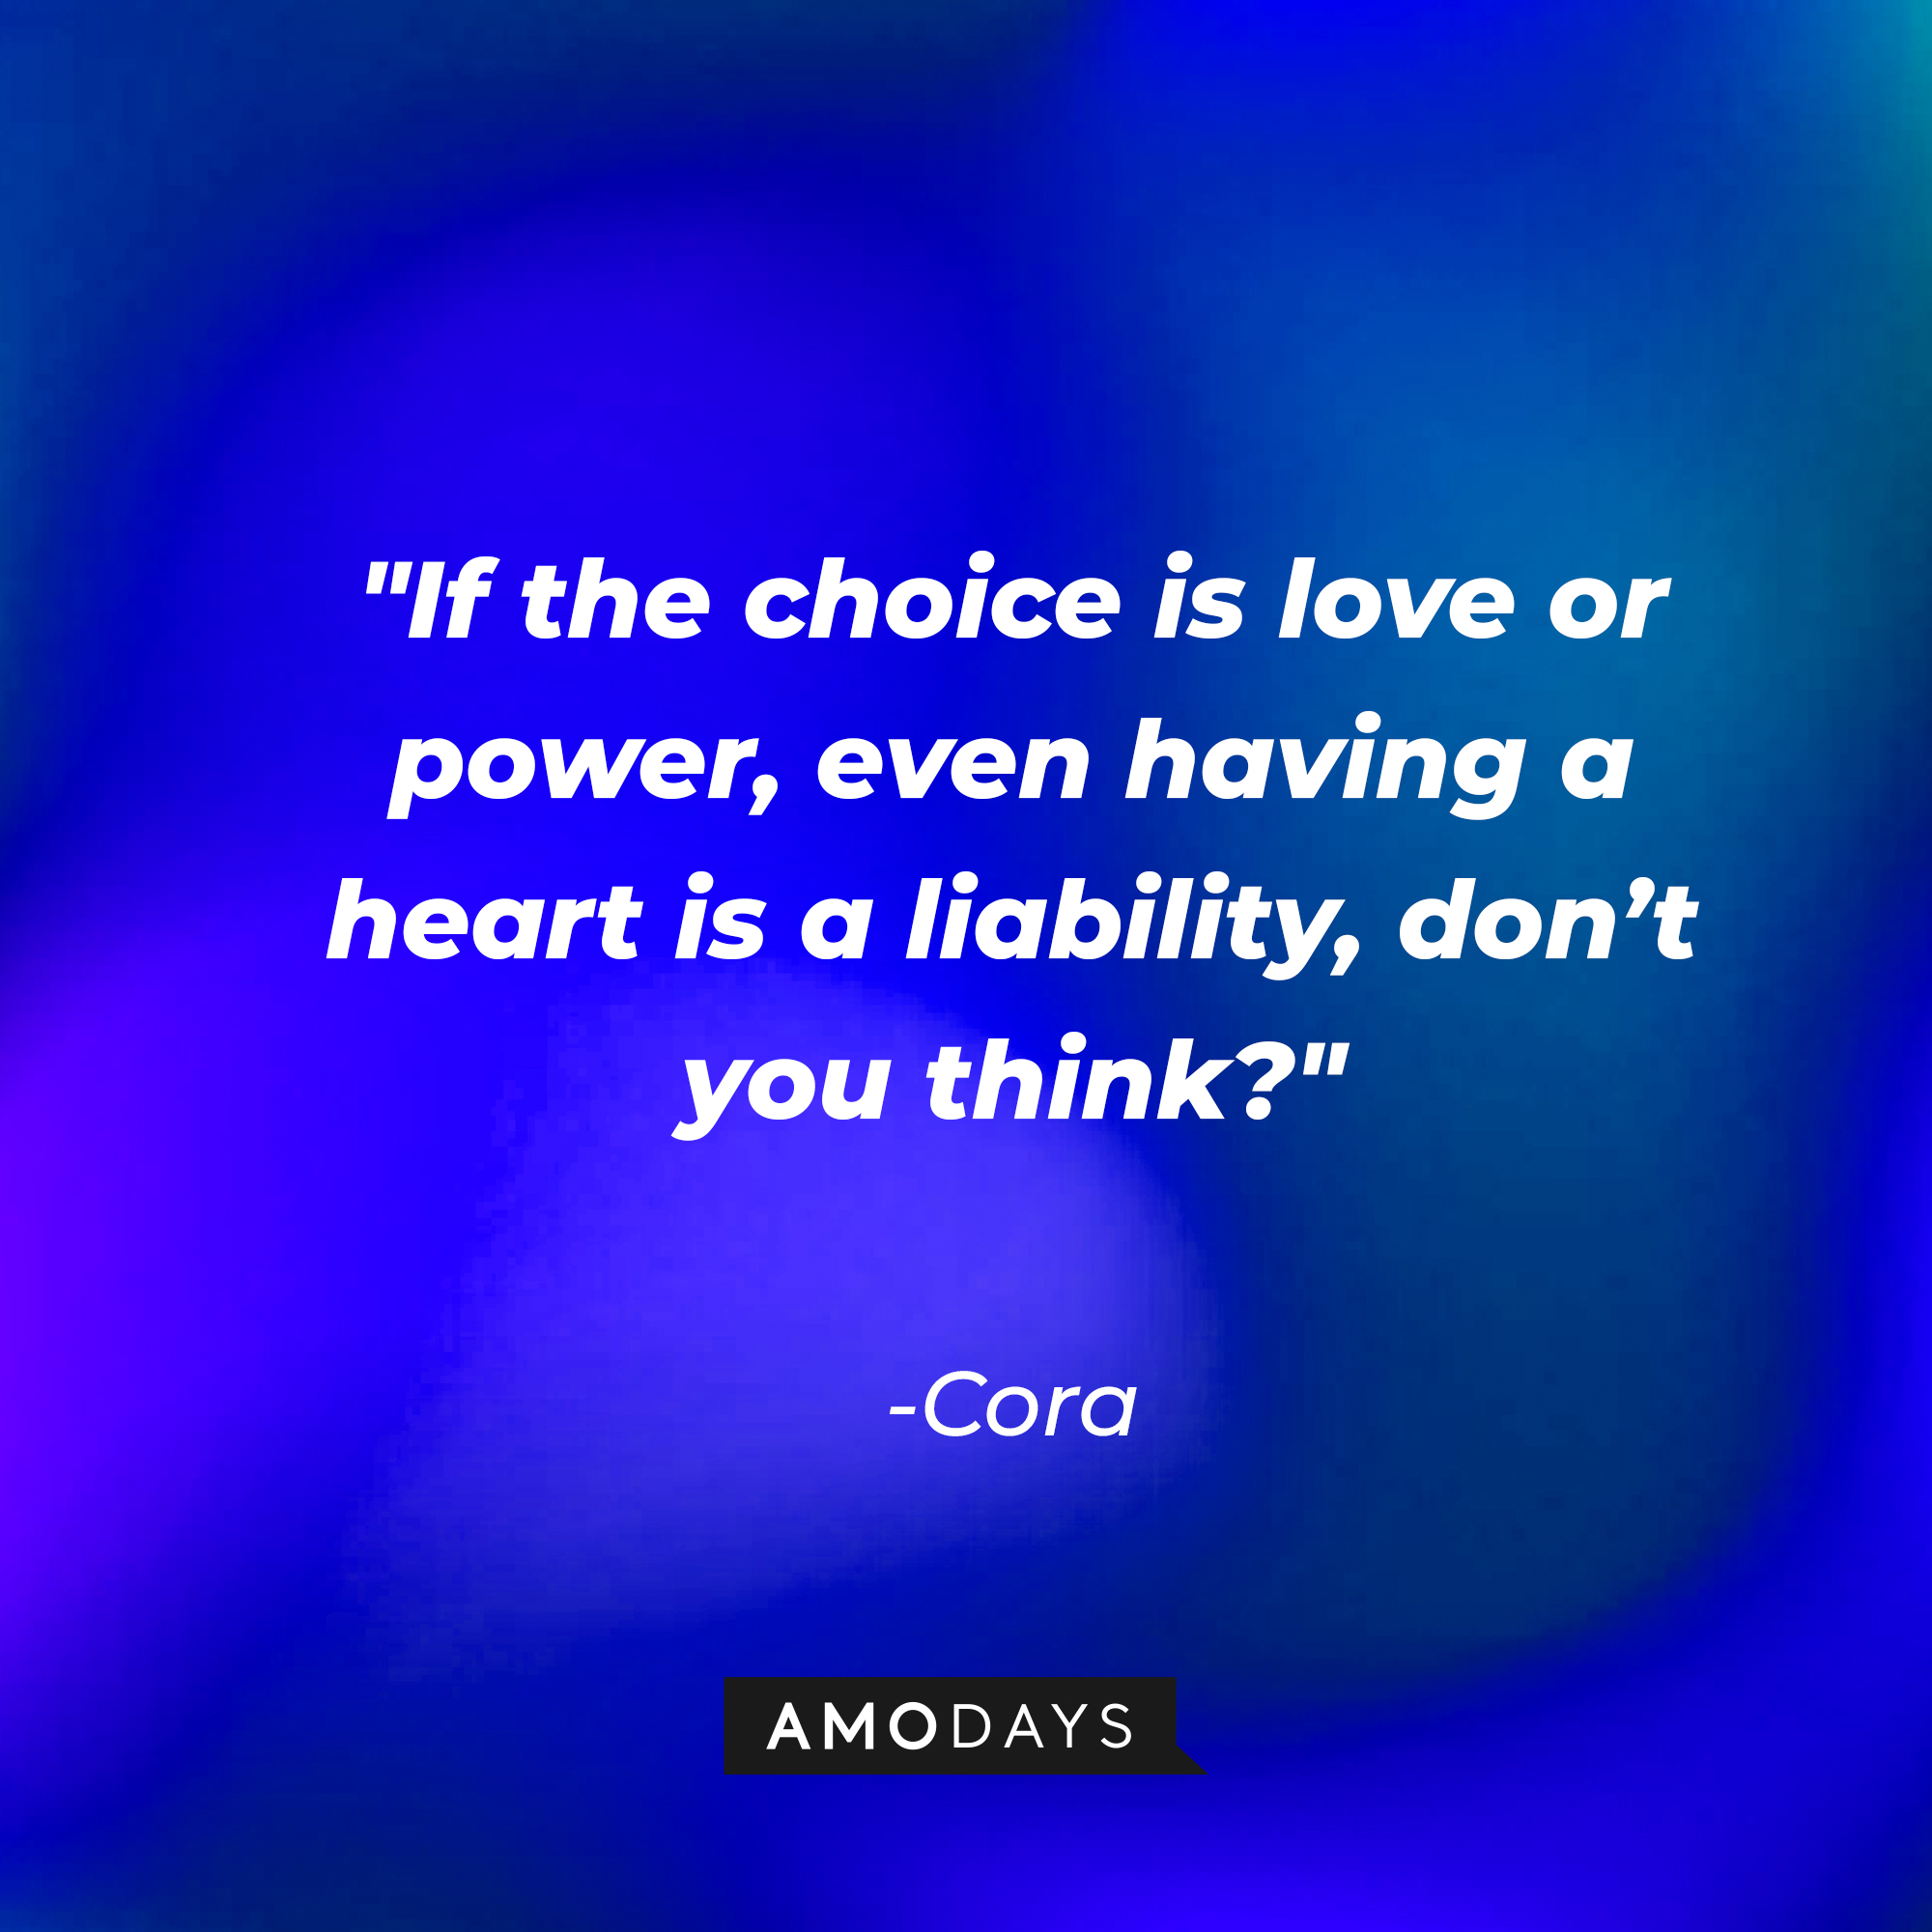 Cora's quote: "If the choice is love or power, even having a heart is a liability, don't you think?" | Source: Amodays